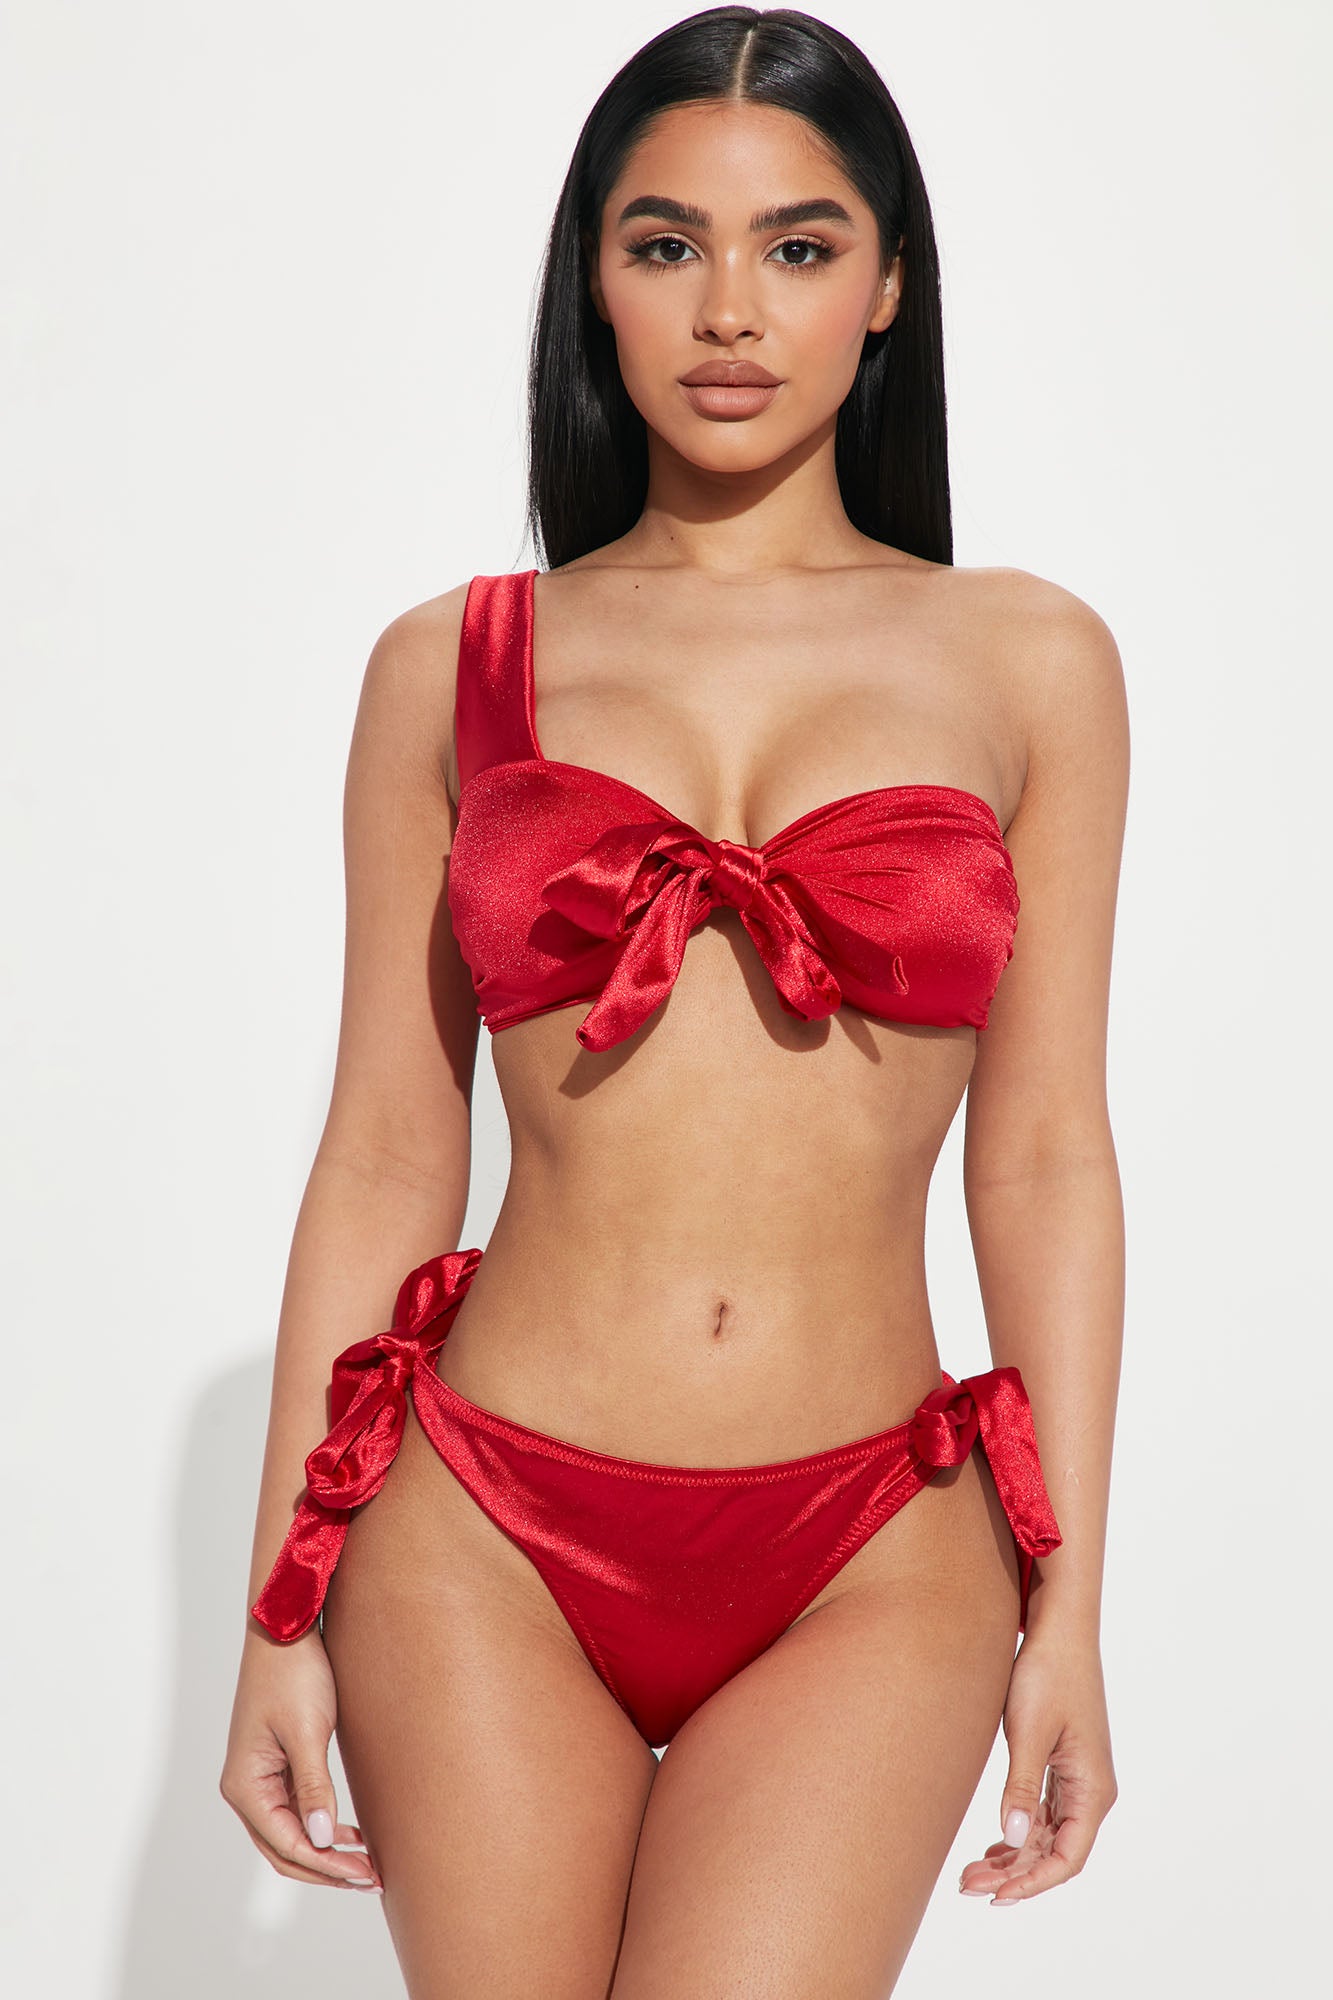 A Gift For You Satin Bow Bra And Panty Set - Red